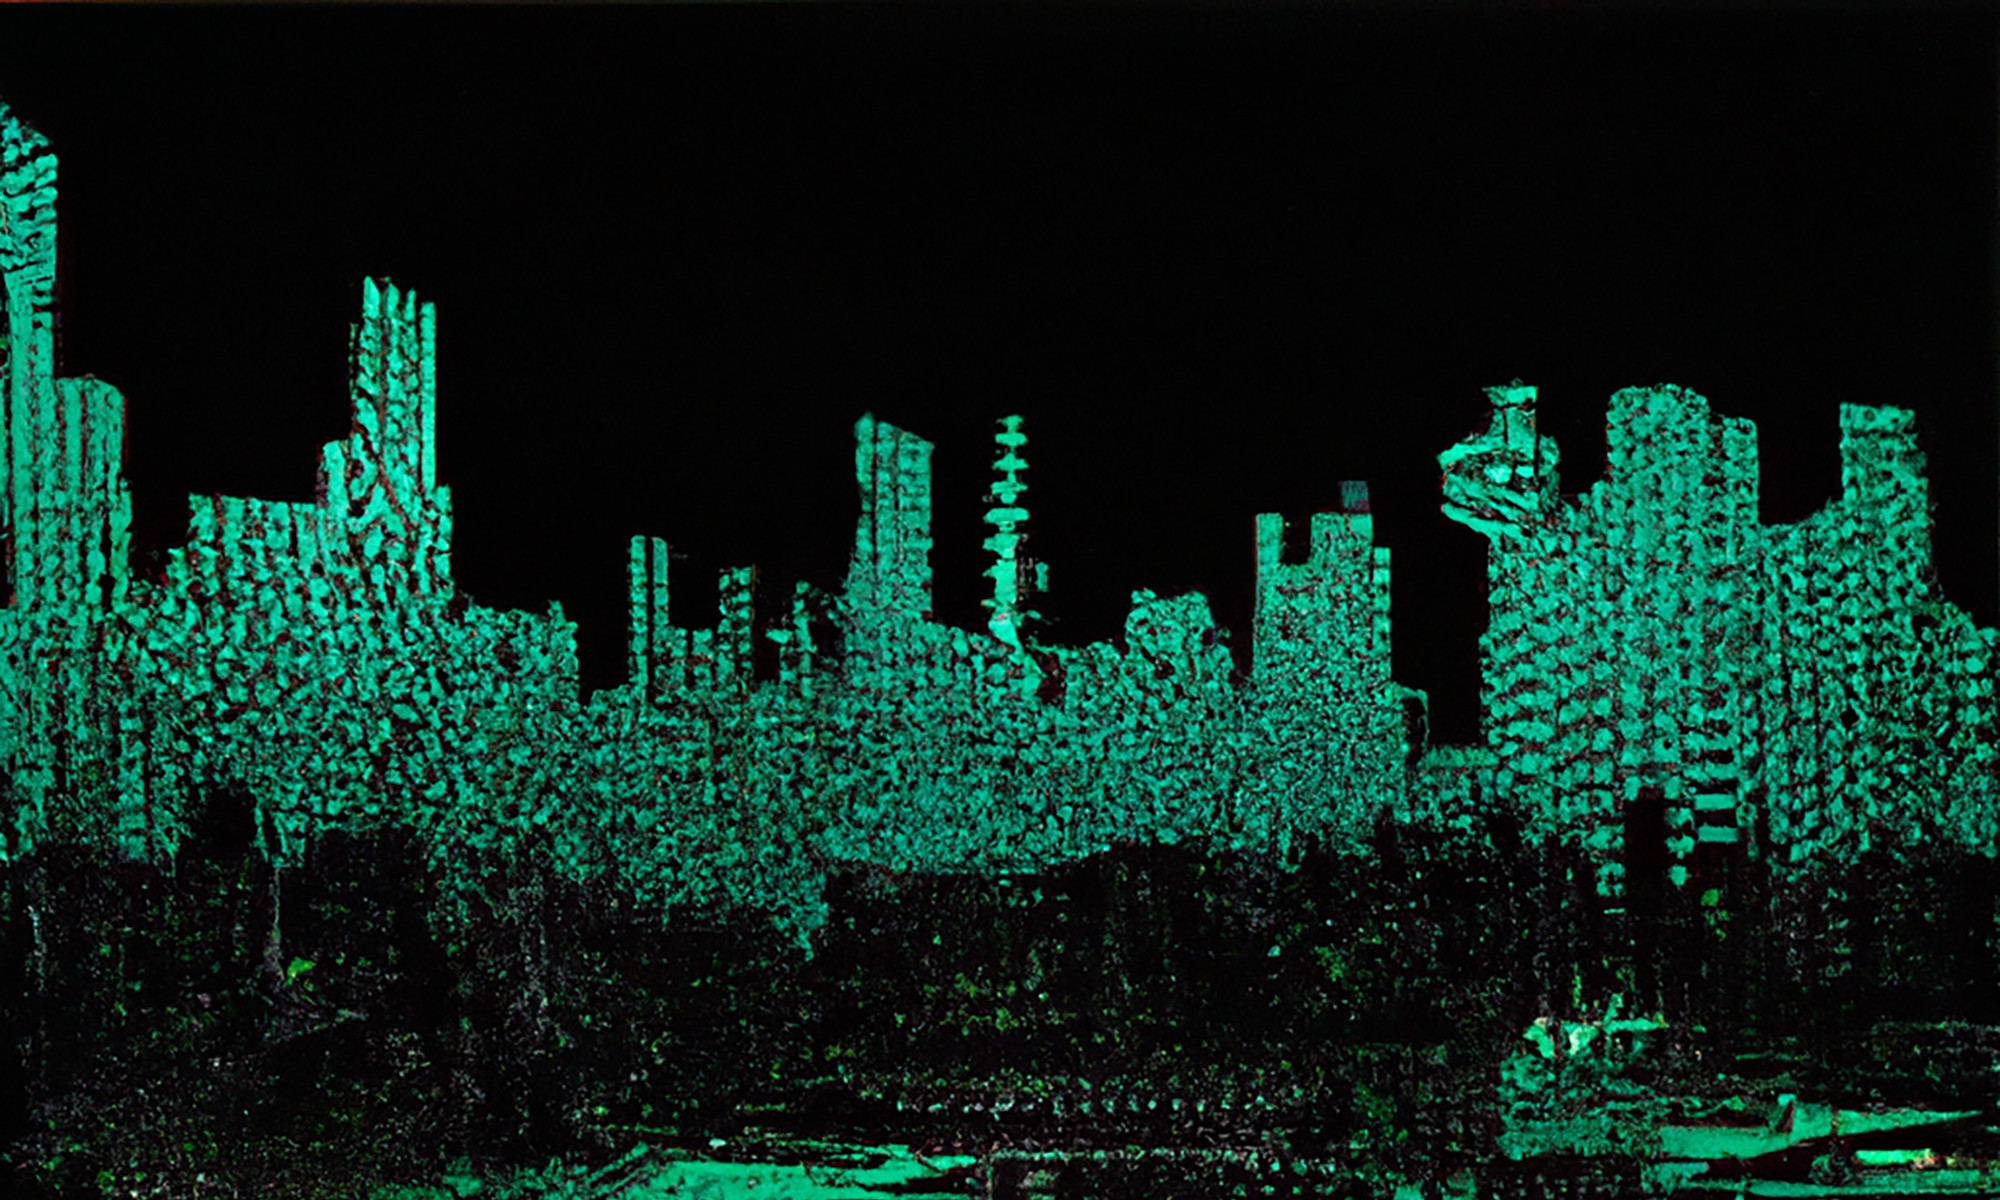 A cityscape made out of circuits